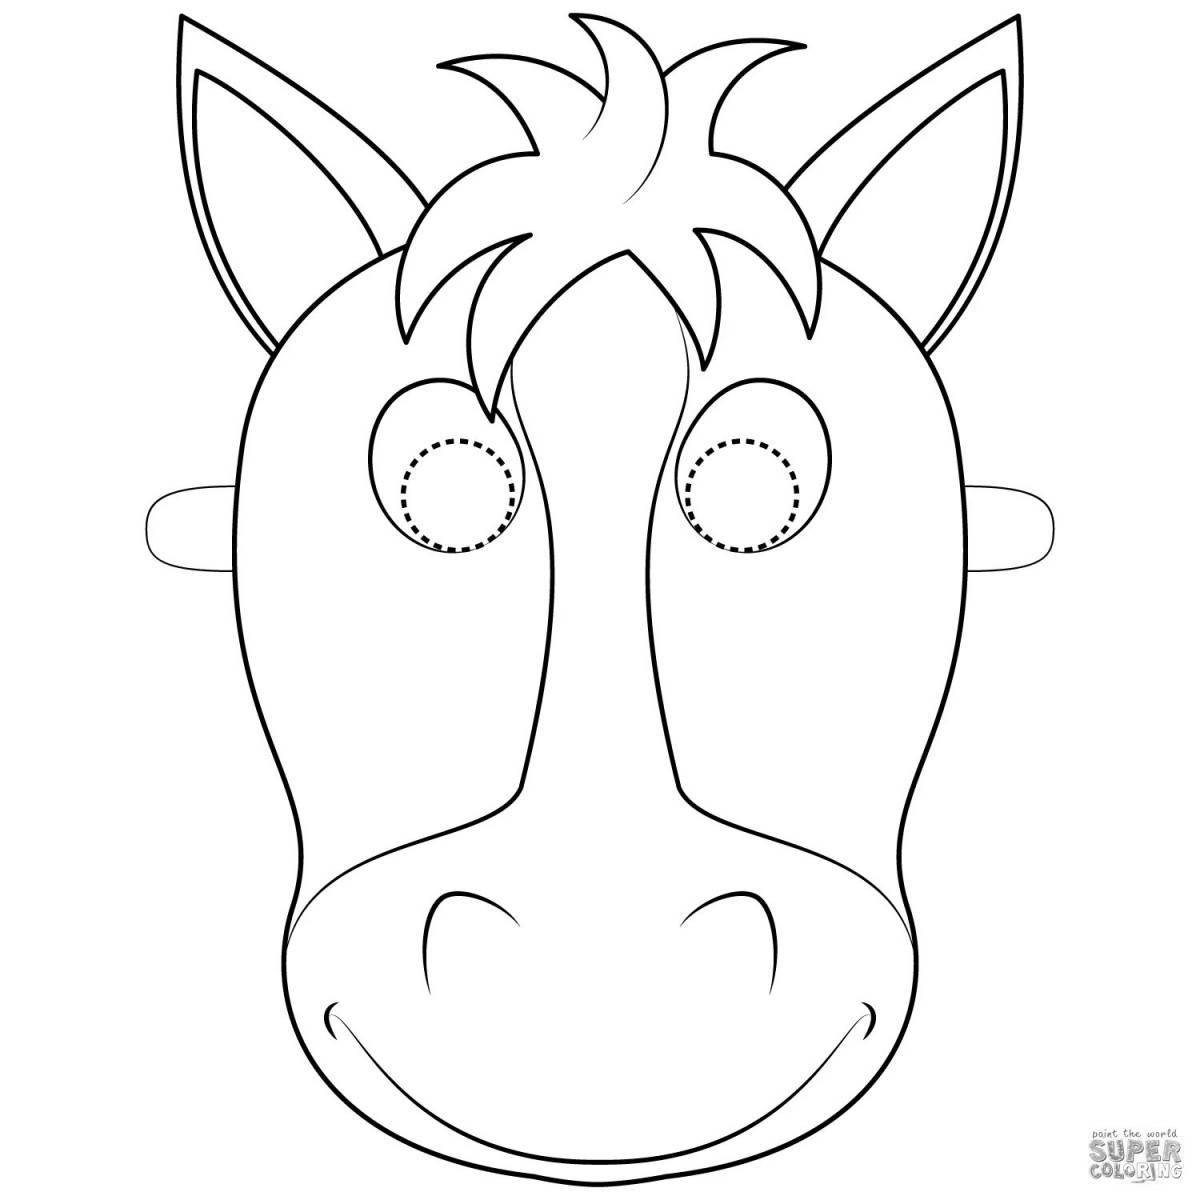 Bright animal mask coloring page design